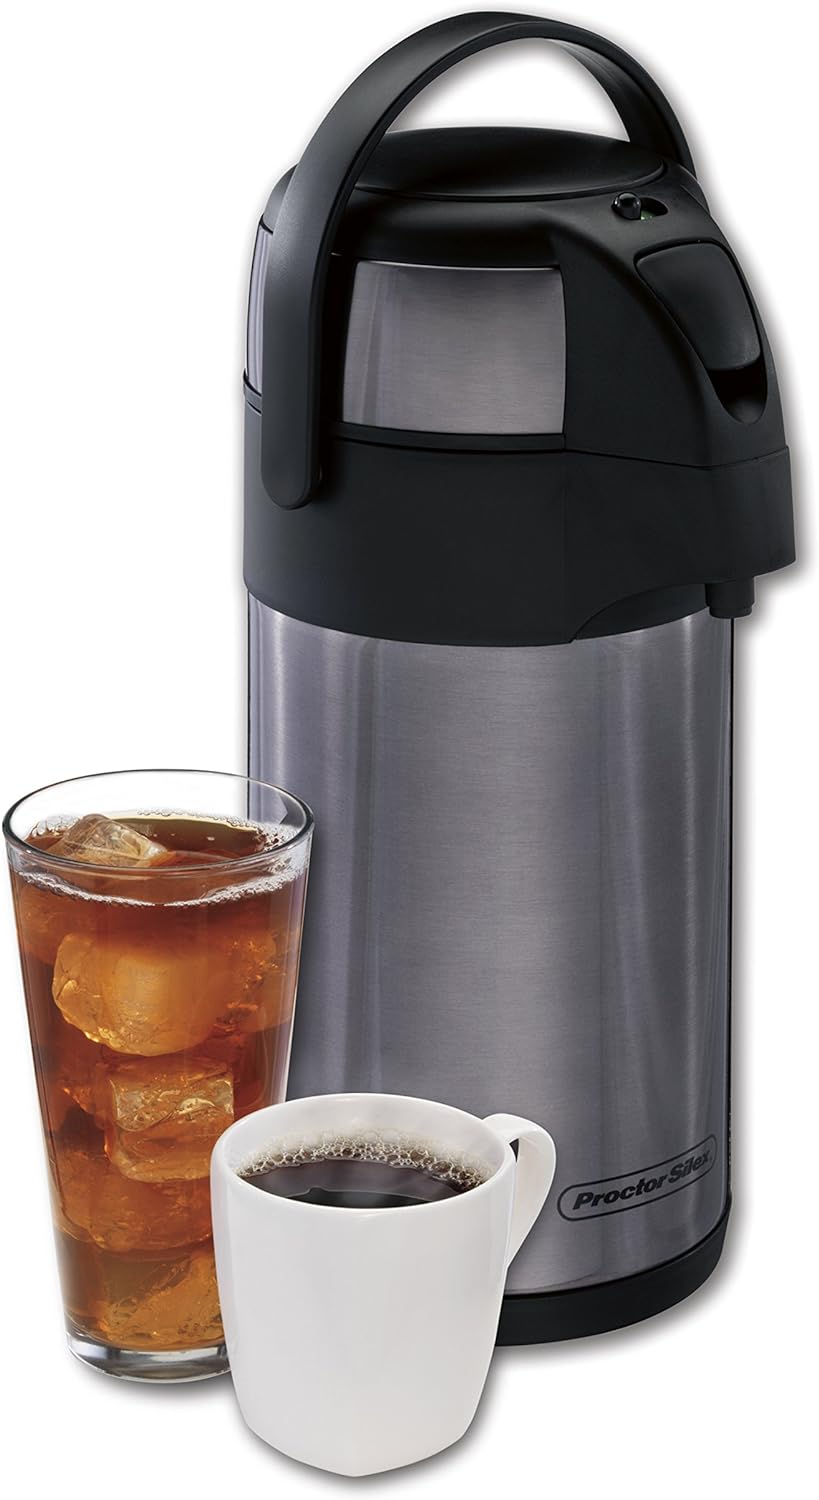 Hamilton Beach Brands Inc. Proctor-Silex Thermal Airpot Hot Coffee/Cold Beverage Dispenser, Vacuum Insulated, Compact and Portable, 2.5 Liter, Stainless S